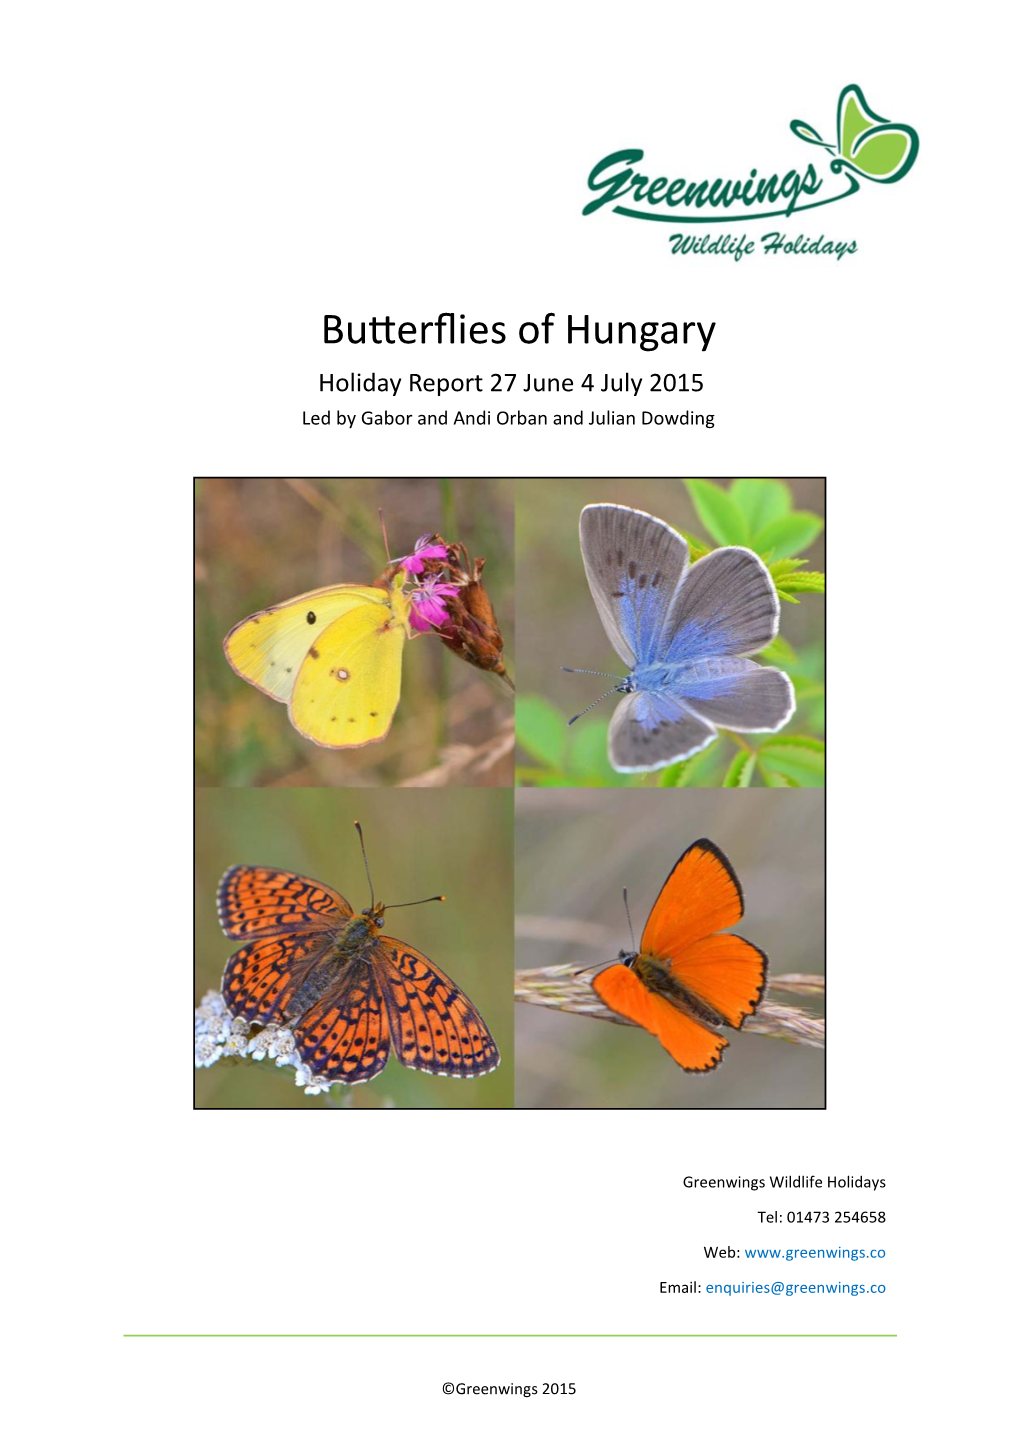 Butterflies of Hungary Holiday Report 27 June 4 July 2015 Led by Gabor and Andi Orban and Julian Dowding